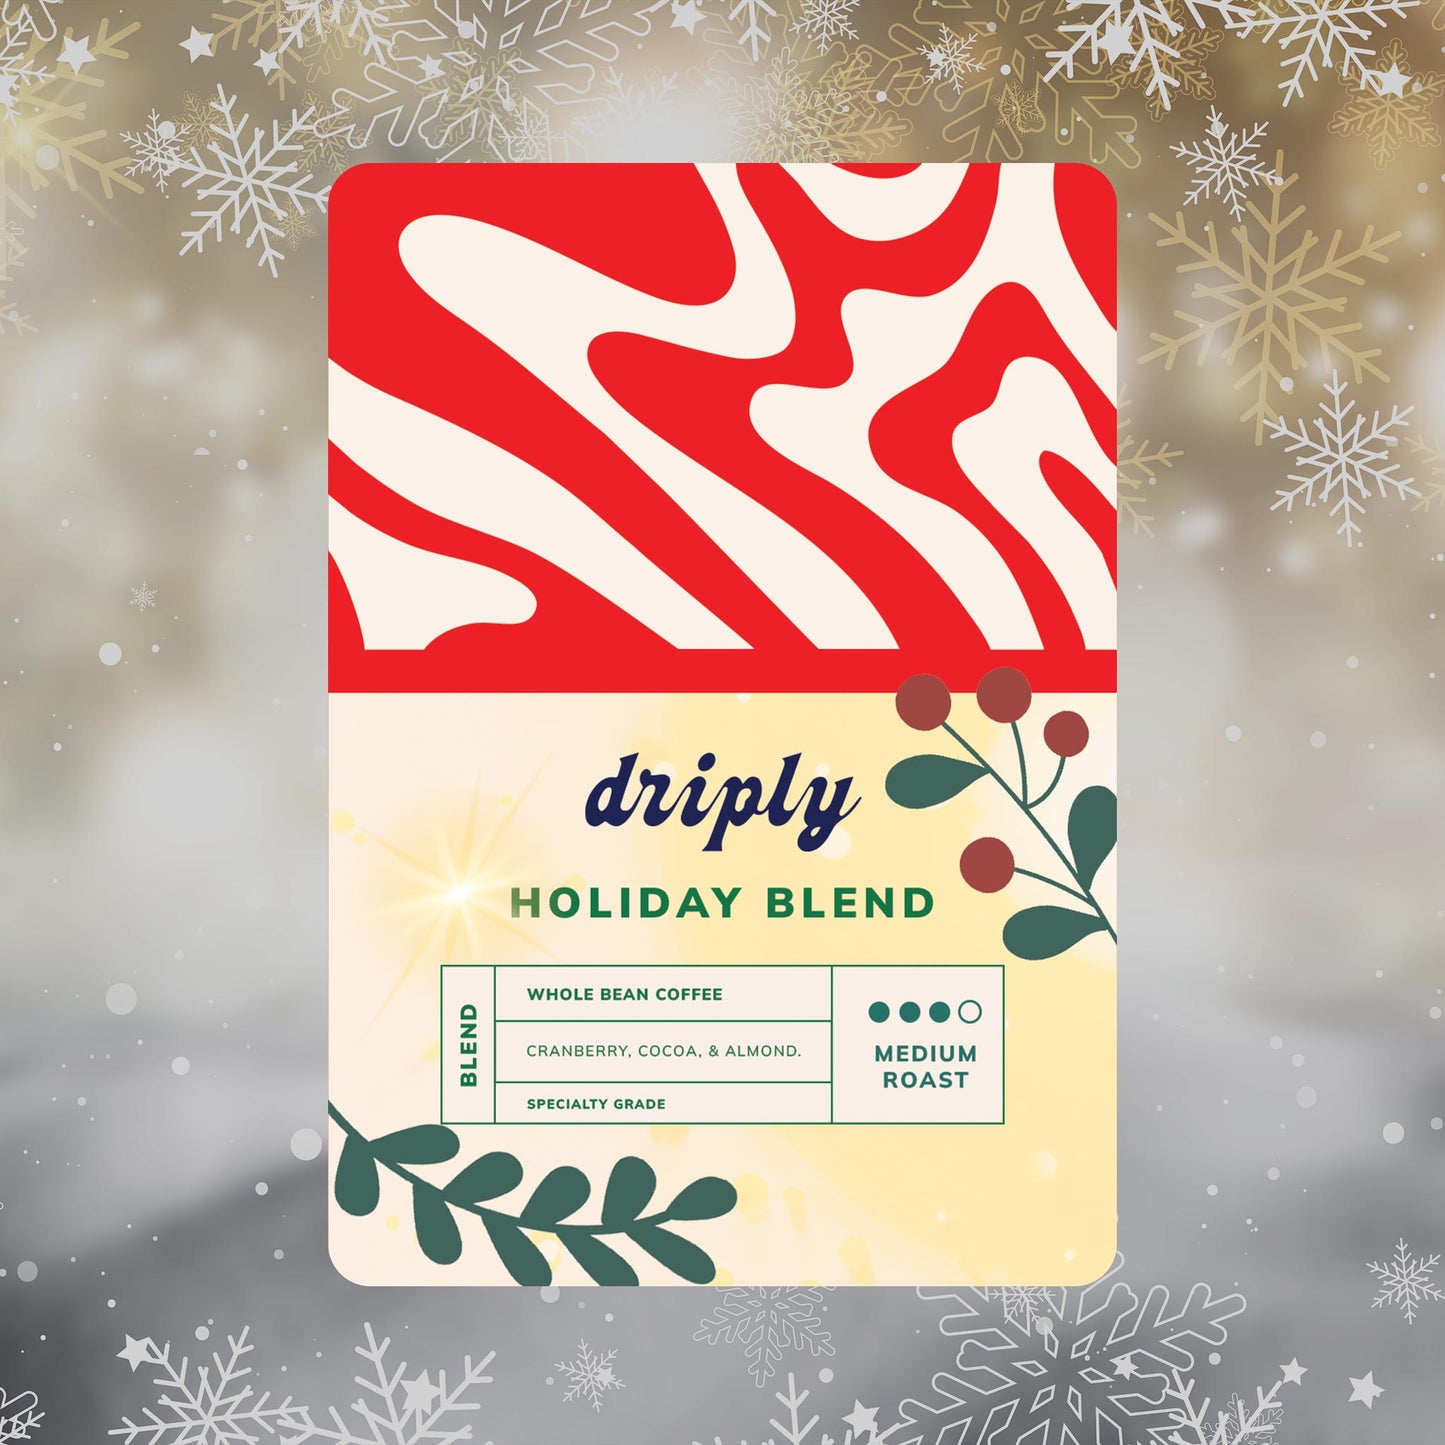 New Holiday Blends